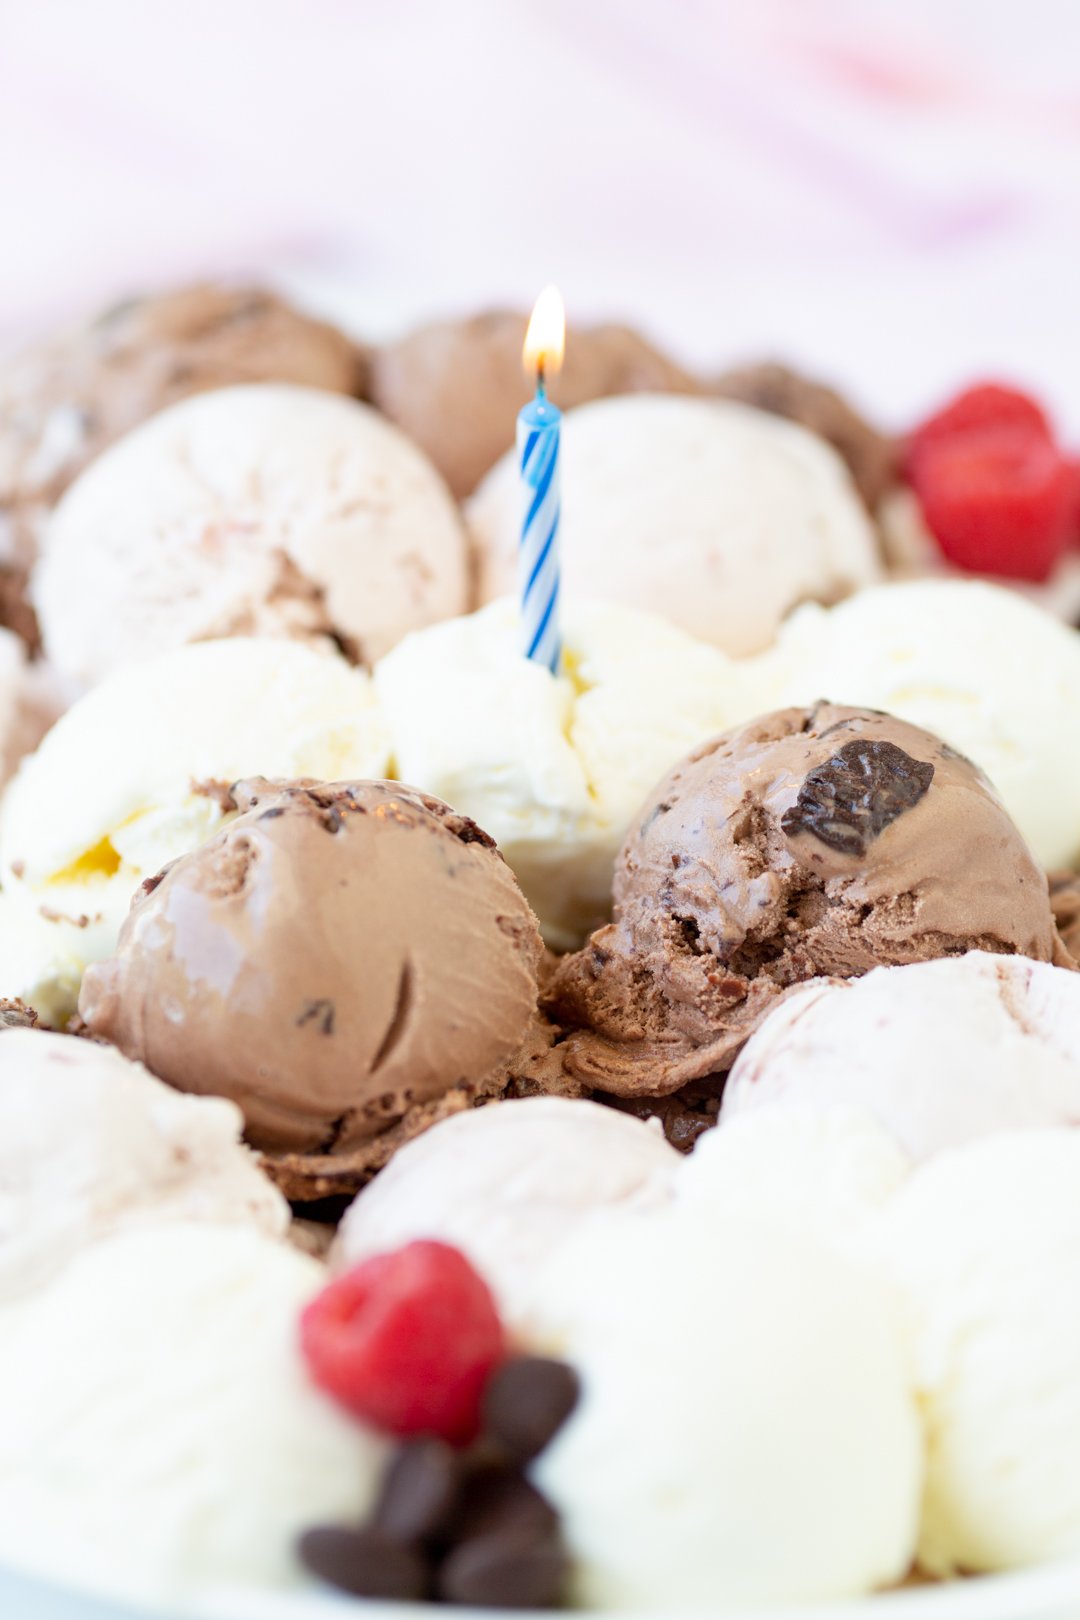 birthday candle in a pile of ice cream scoops